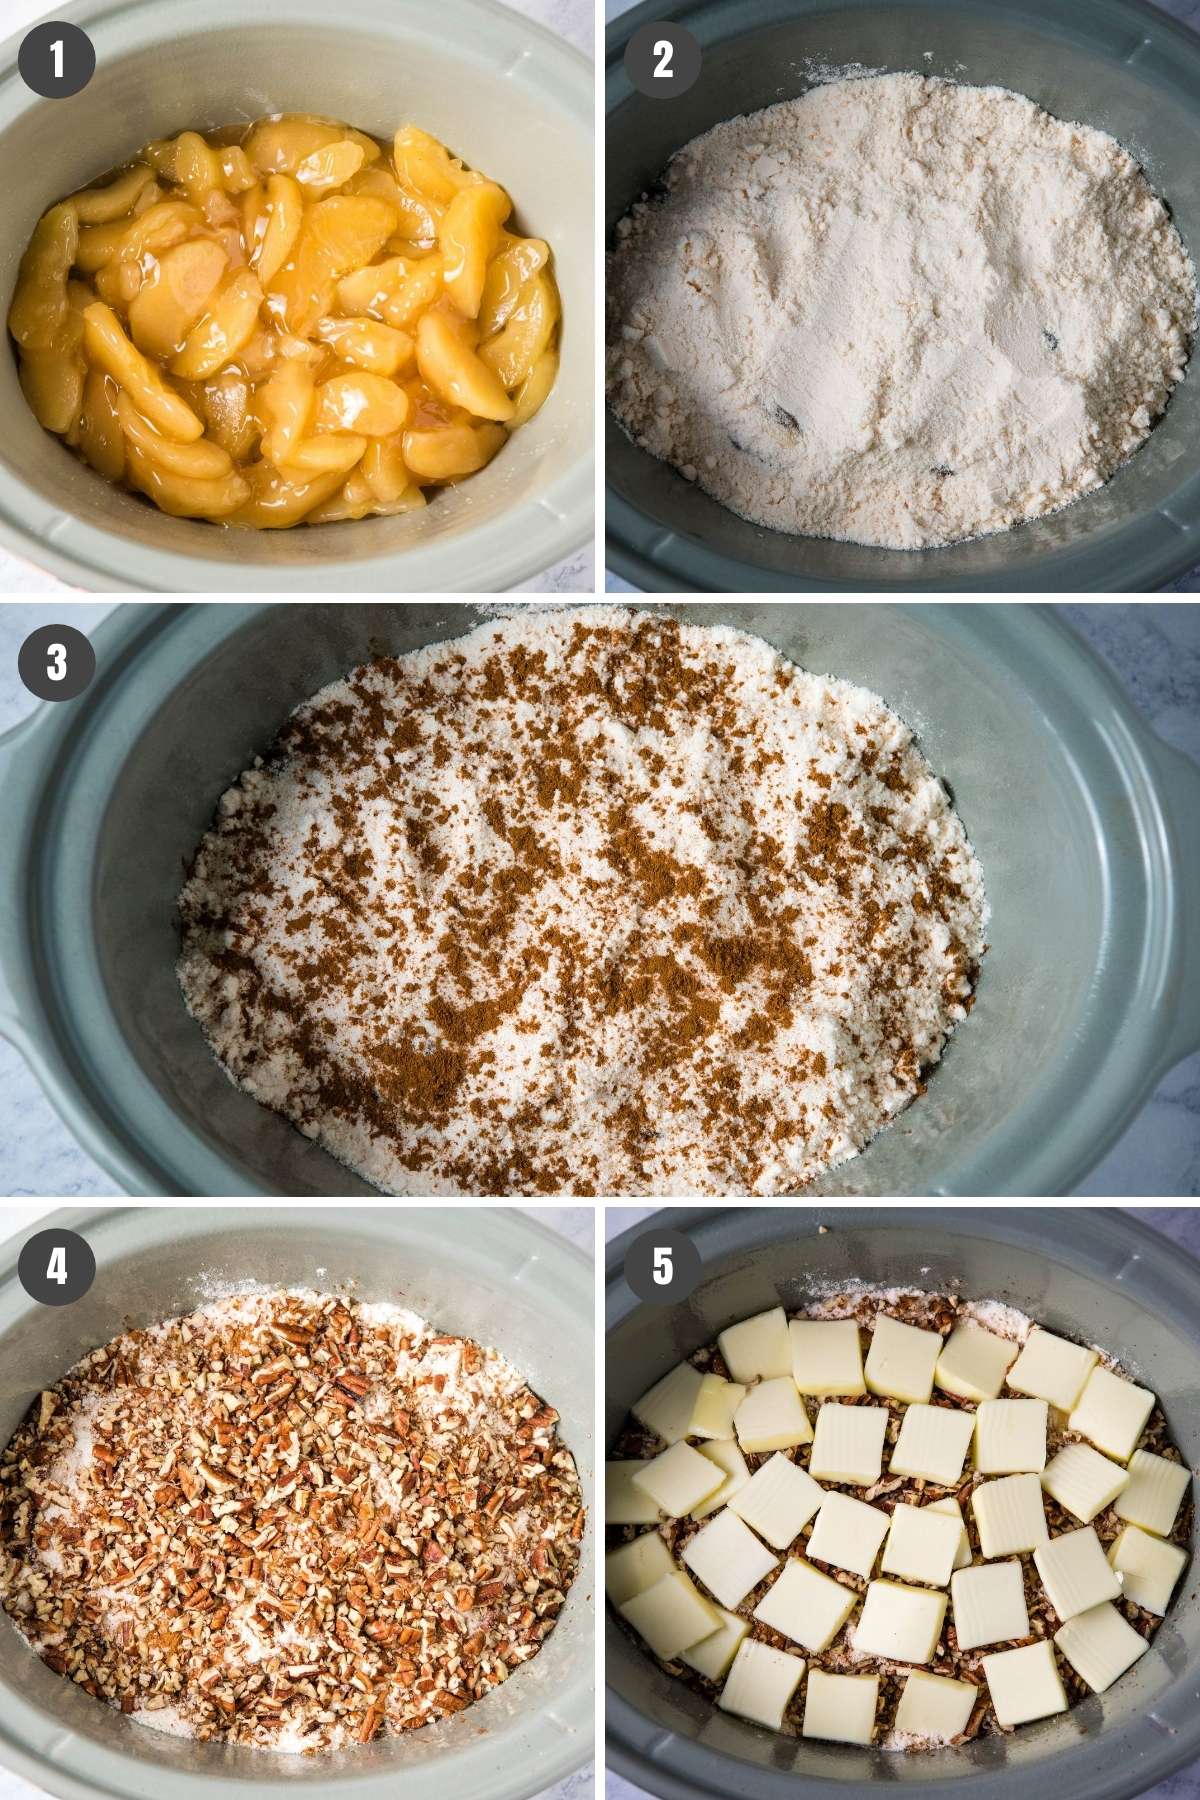 steps for how to make CrockPot apple dump cake, including layering ingredients in slow cooker